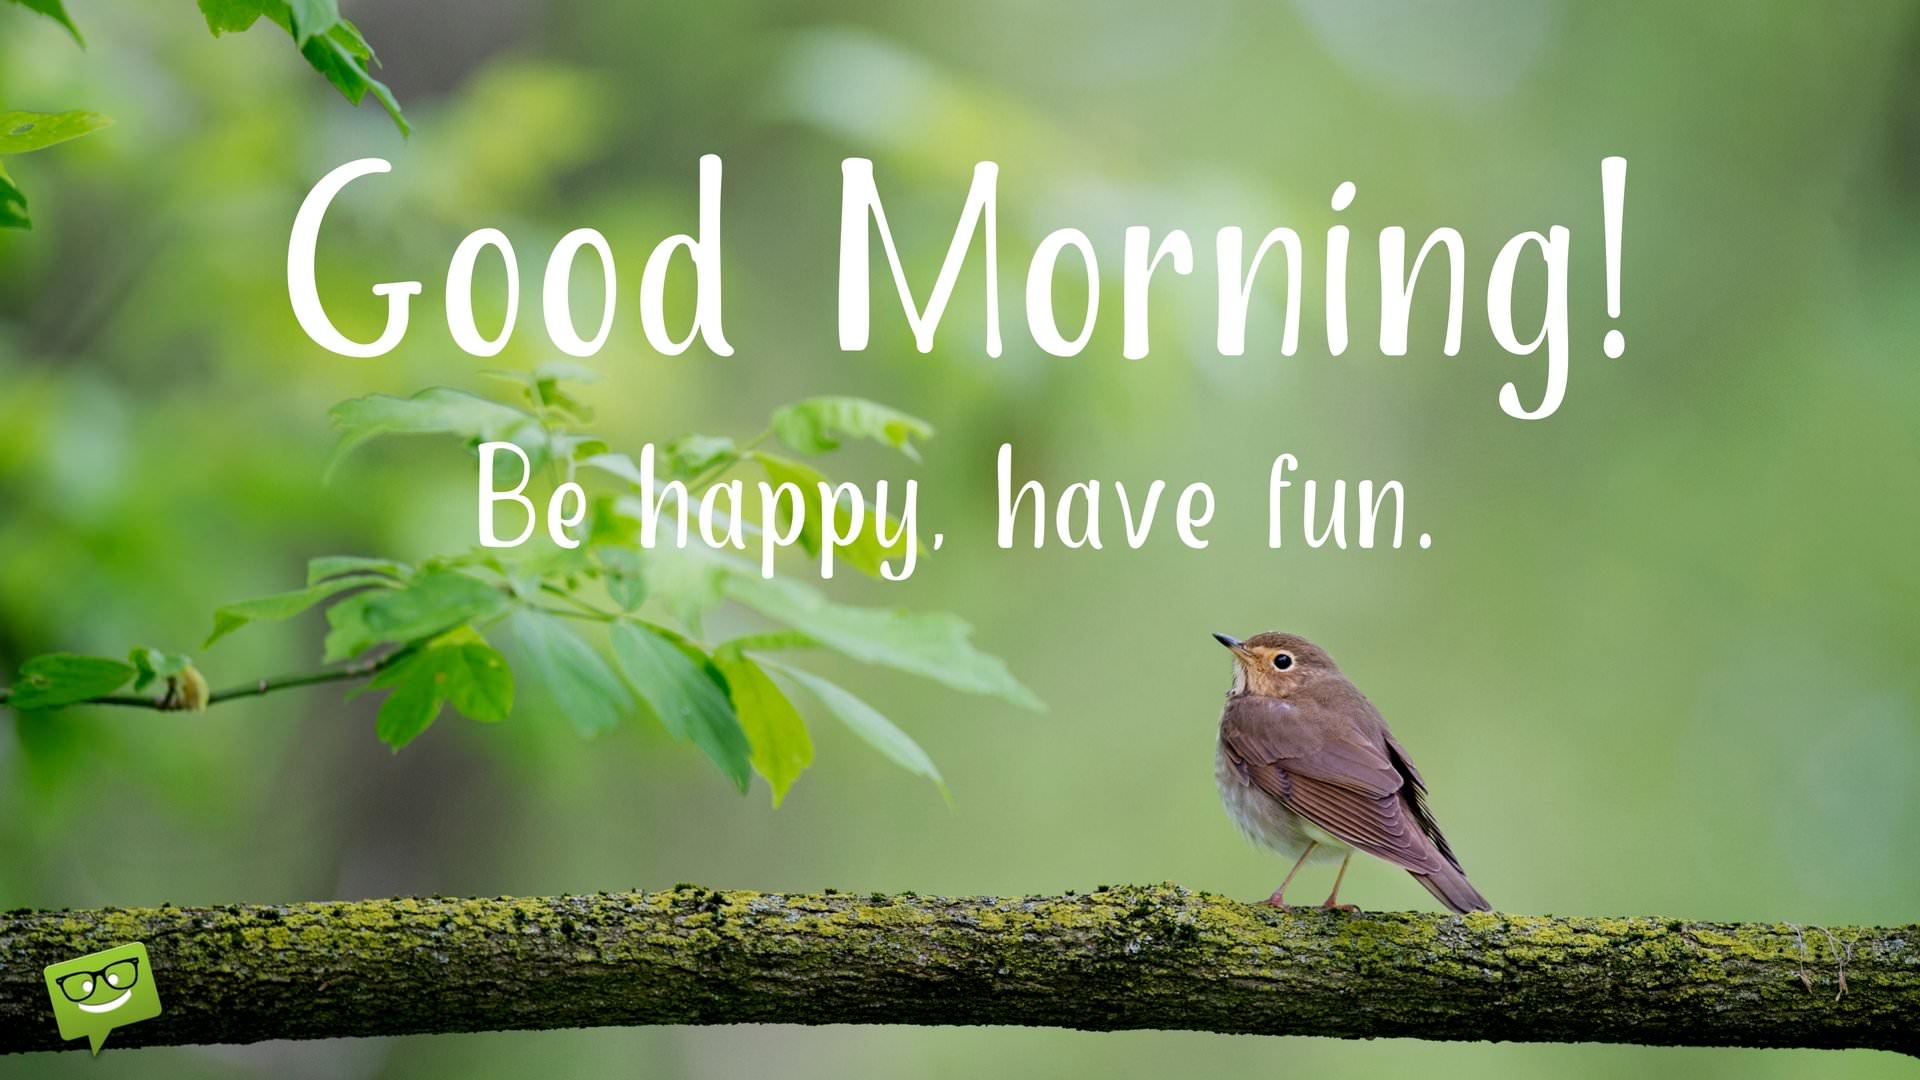 Be Happy, Have Fun - Good Morning Images Birds Hd - HD Wallpaper 